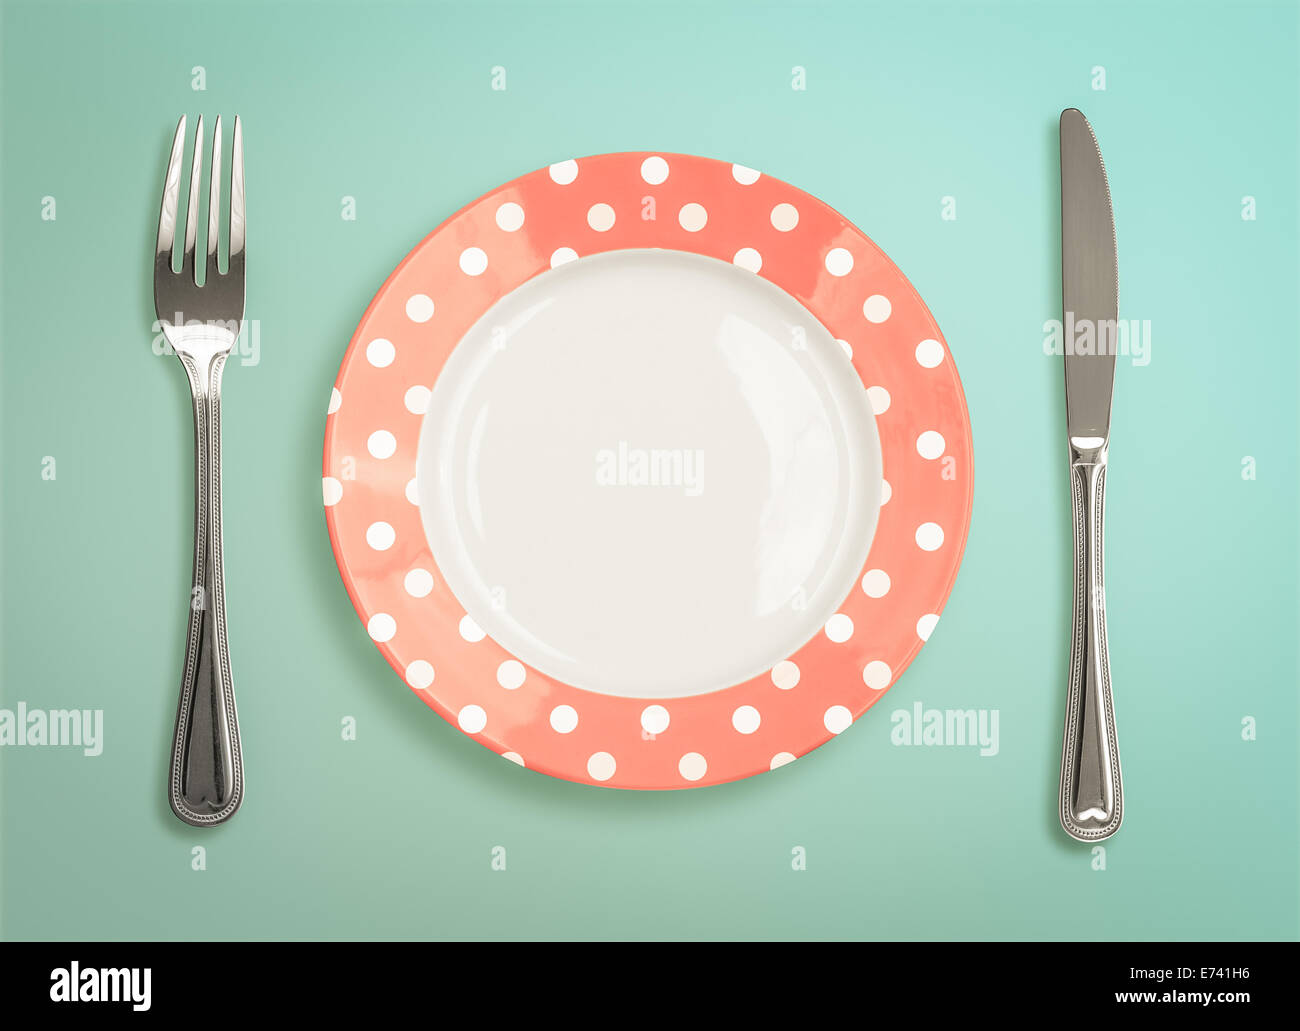 Retro polka dot plate with fork and knife top view Stock Photo